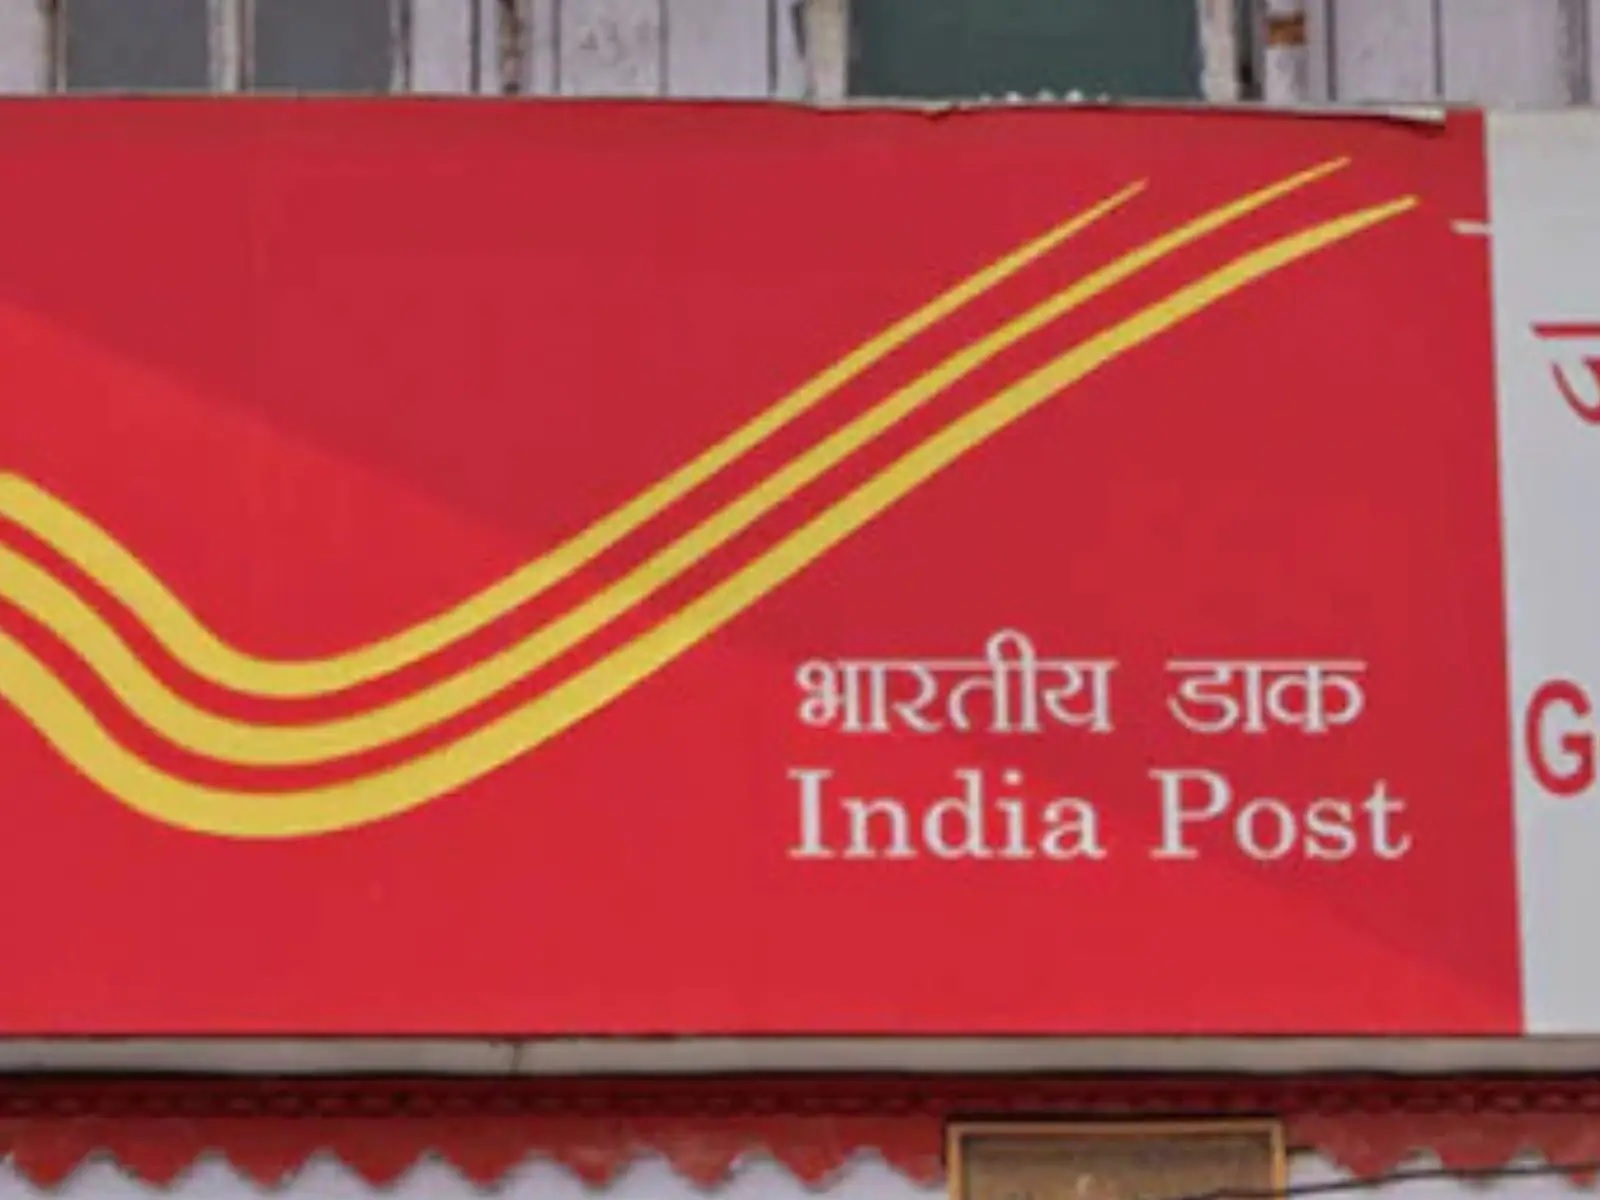 FD gets huge interest in post section scheme! Learn the whole information